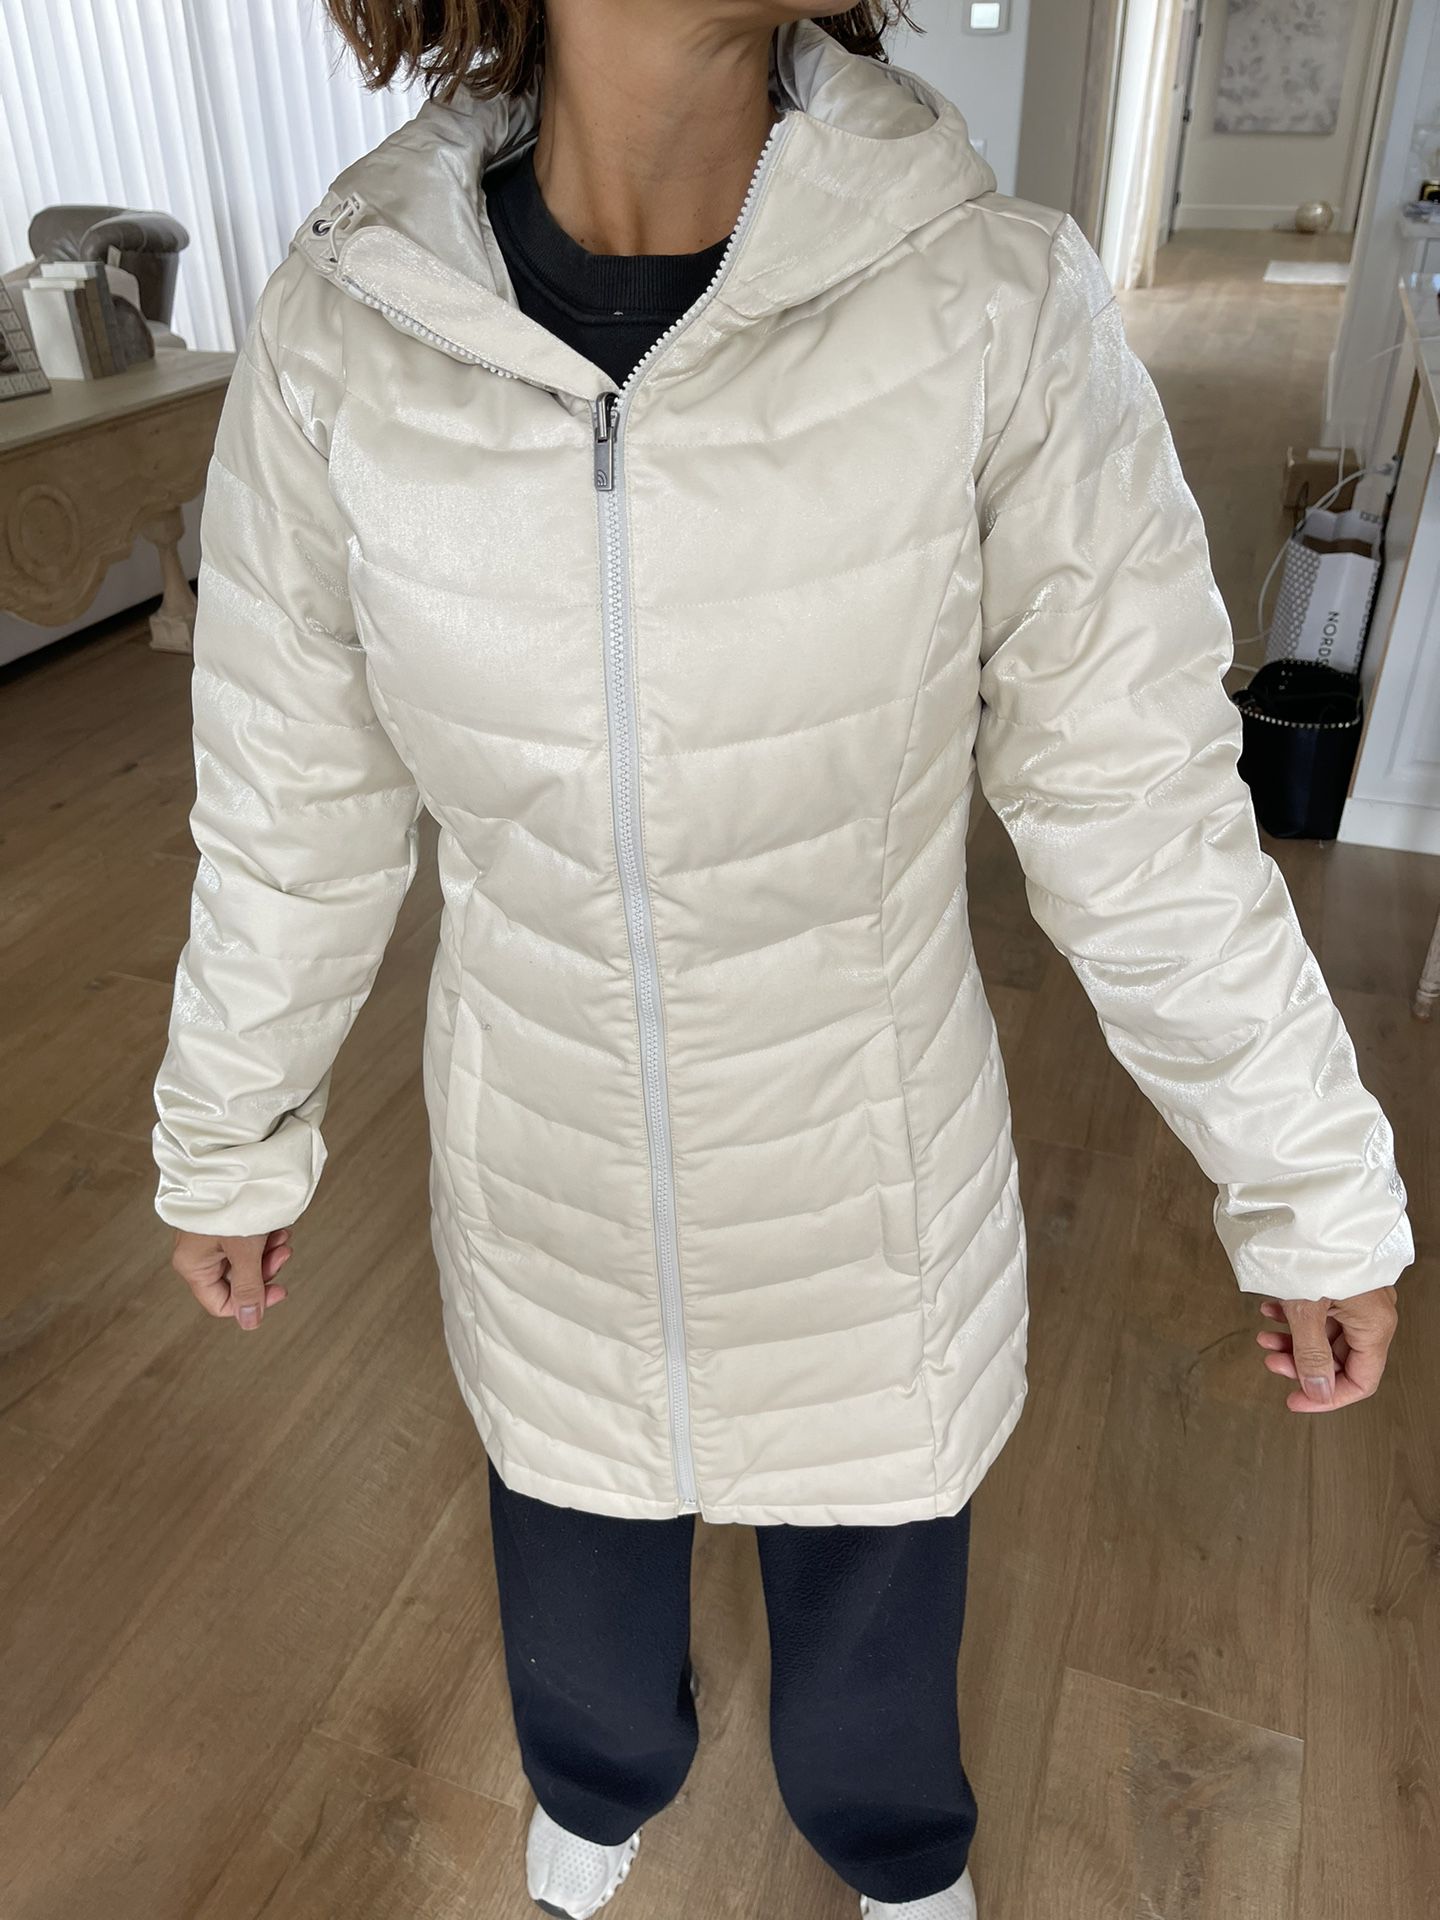 North Face Women’s Puffer Jacket $150 MSRP